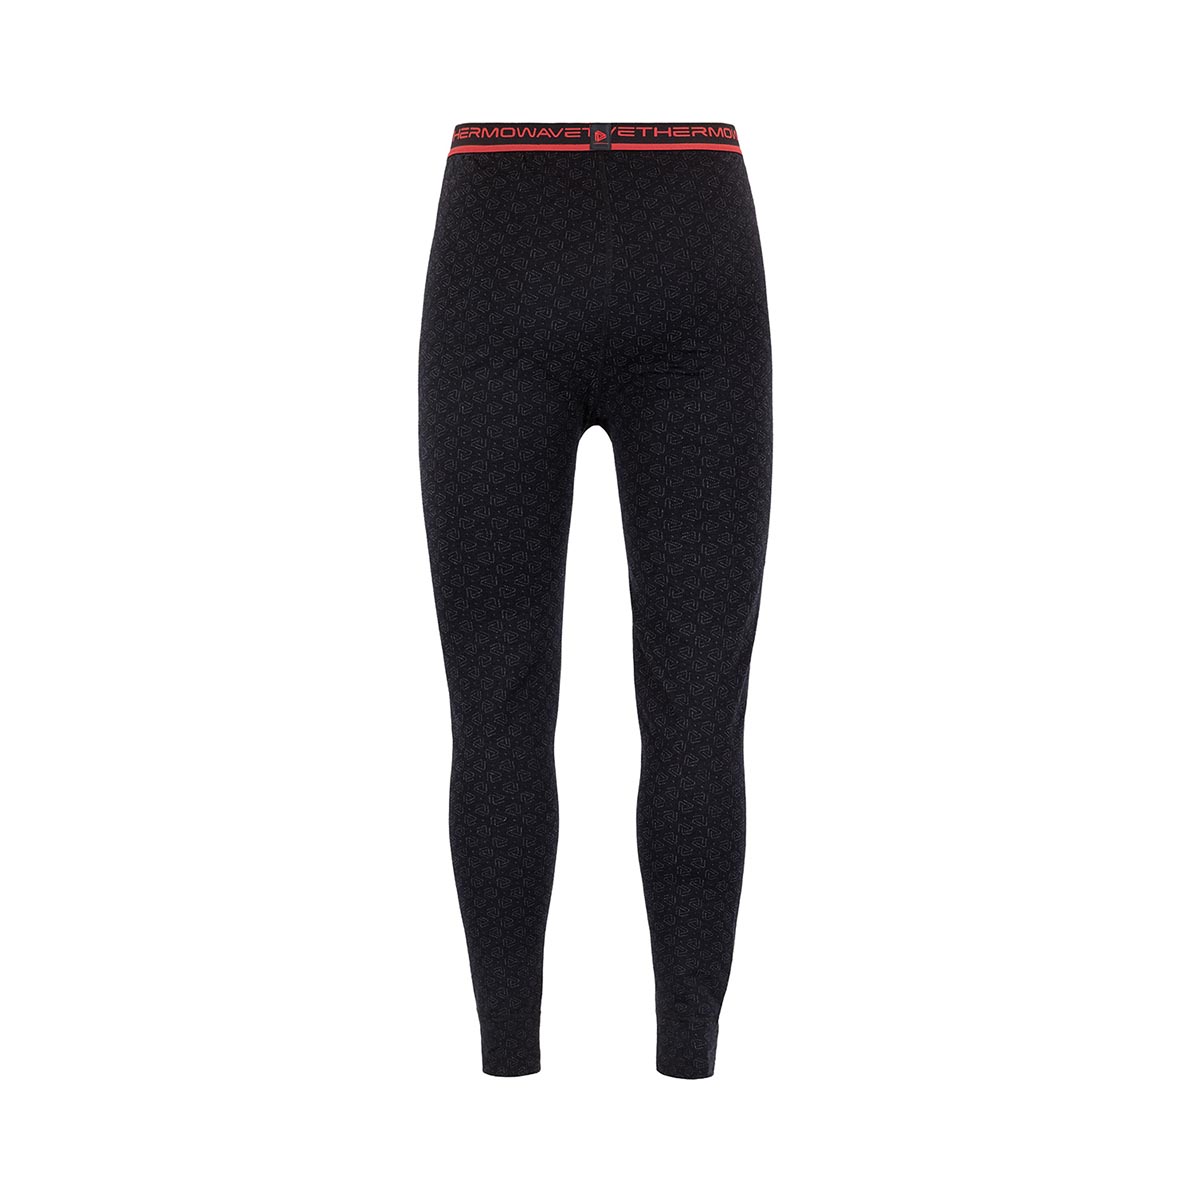 THERMOWAVE - MERINO XTREME LONG PANTS